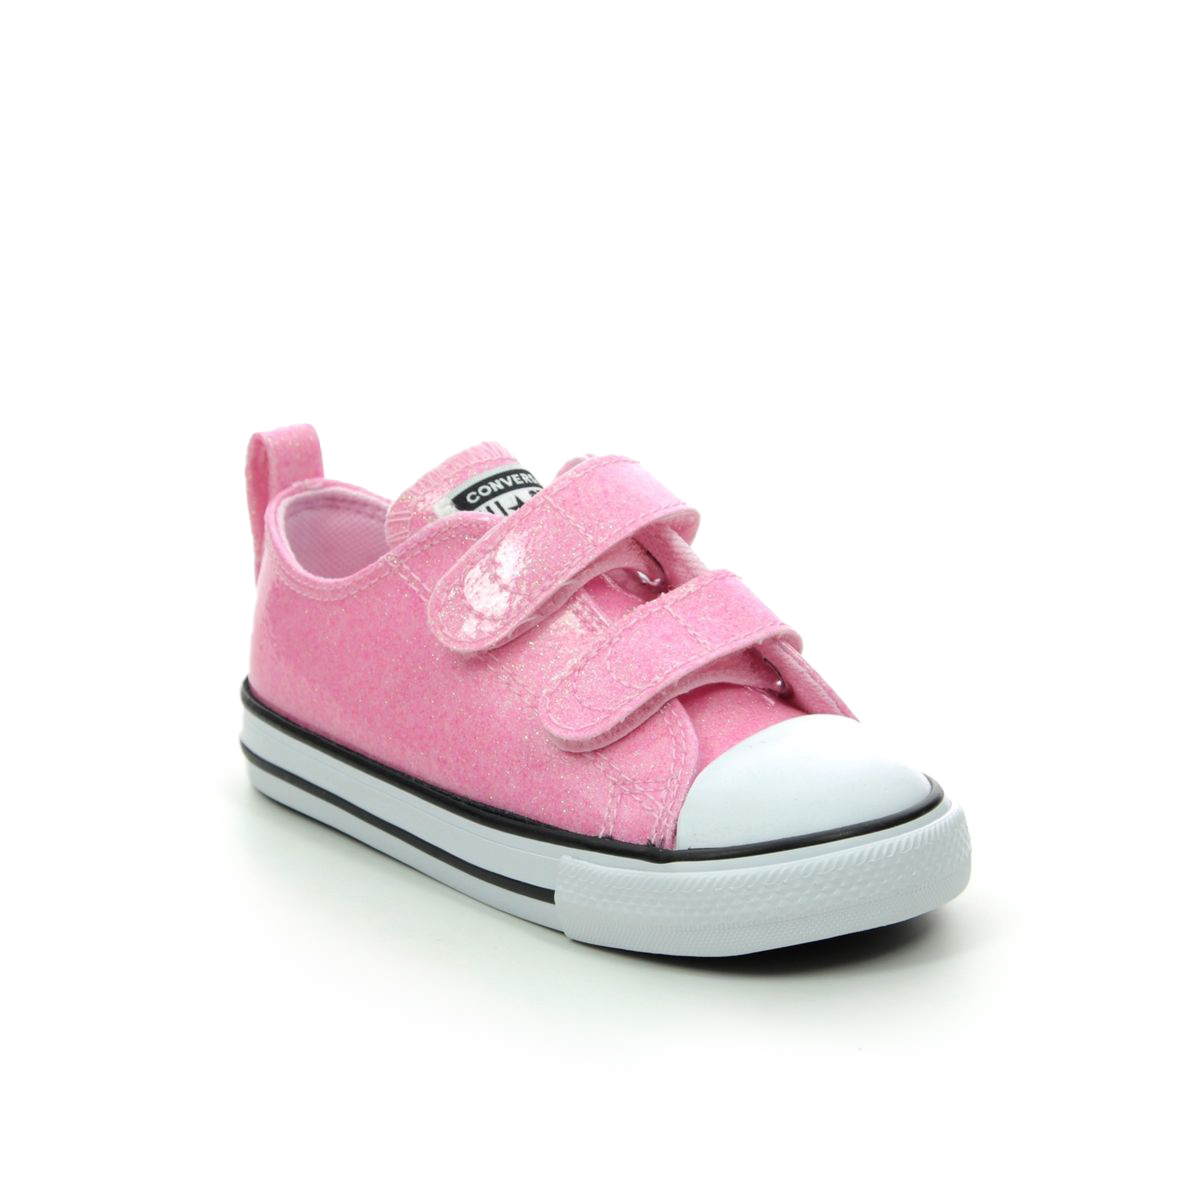 pink converse boots